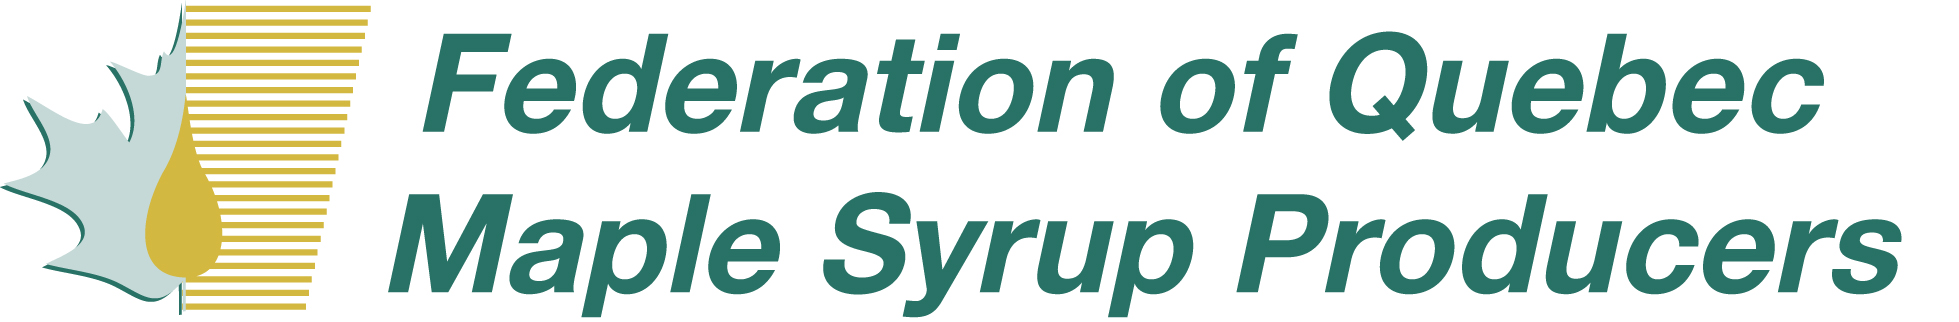 Federation of Quebec Maple Syrup Producers logo